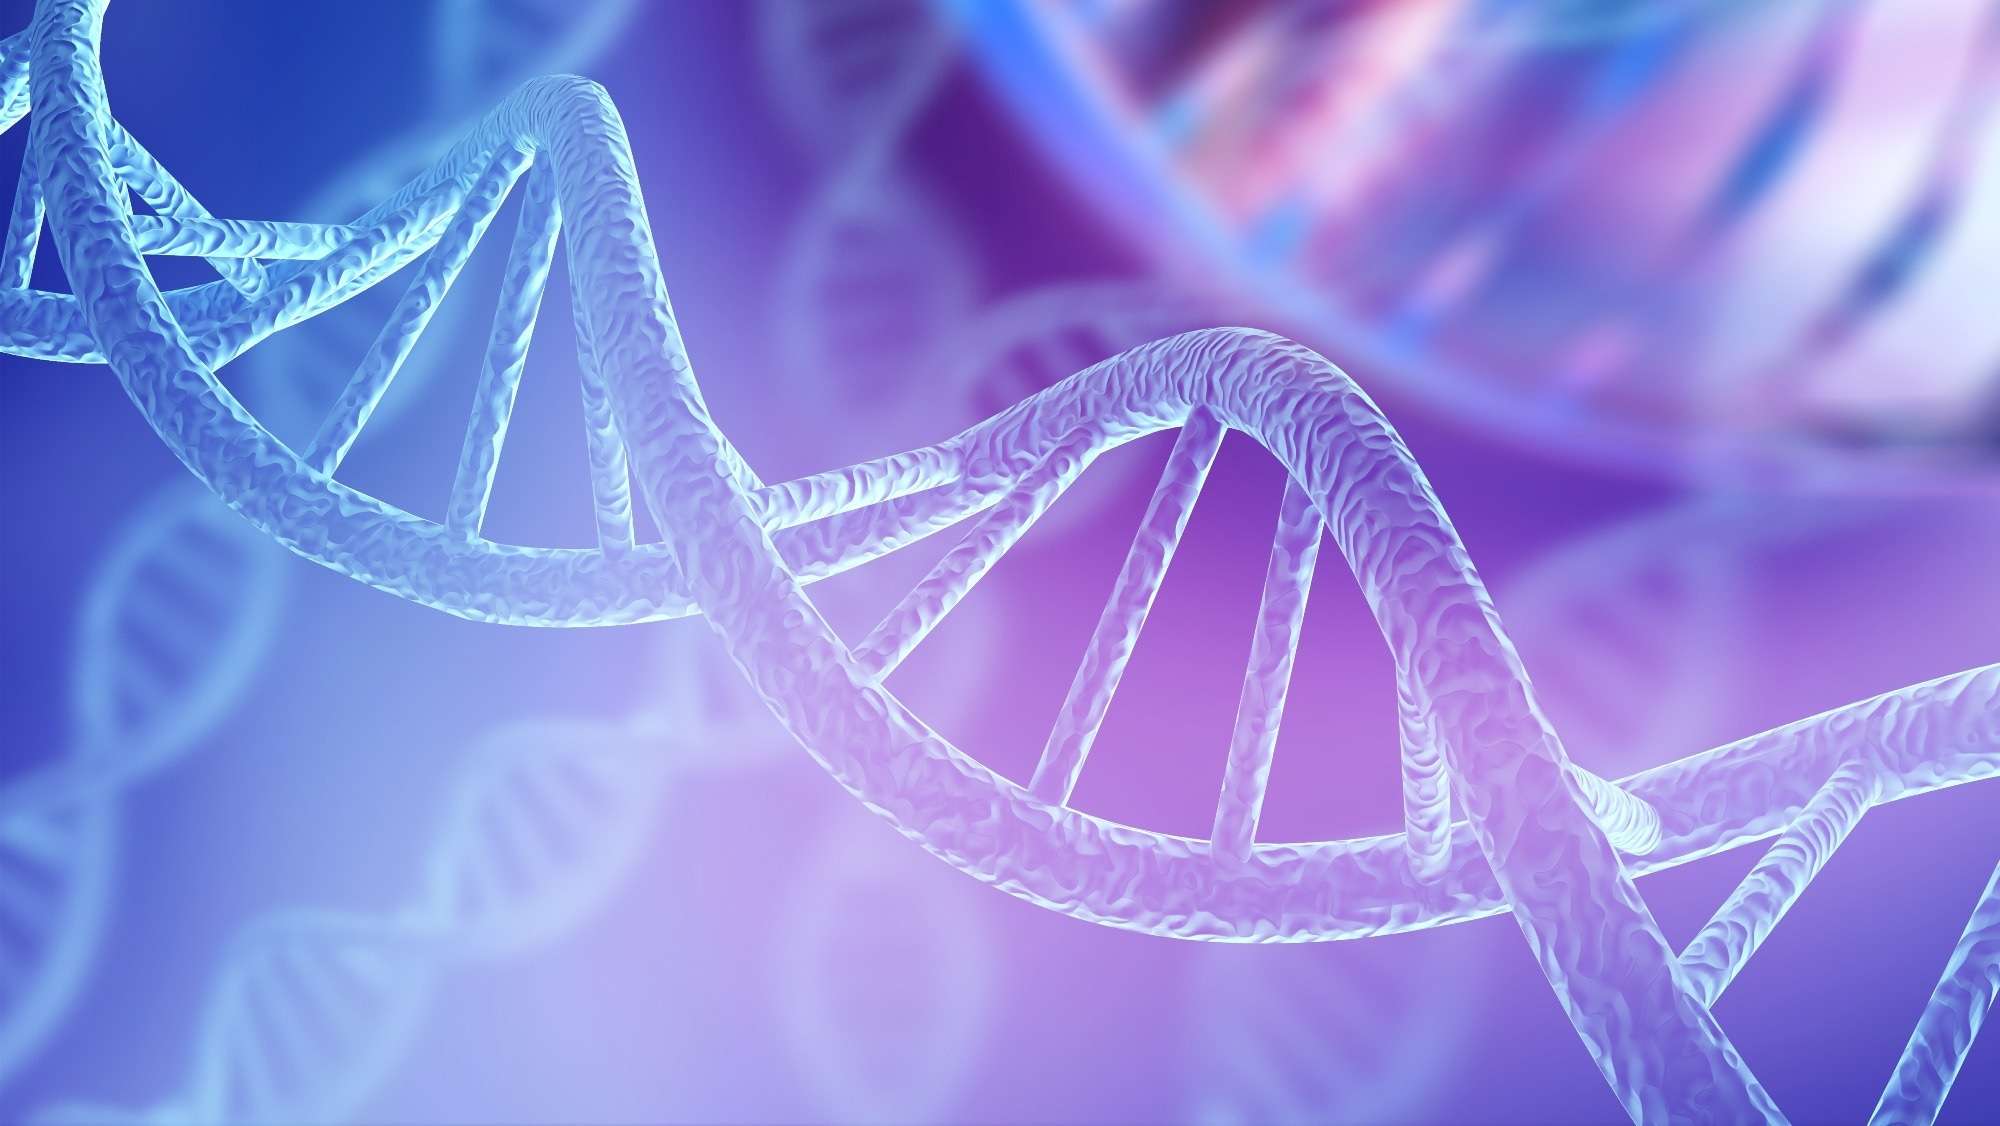 Study: A biological camera that captures and stores images directly into DNA. Image Credit: BillionPhotos/Shutterstock.com